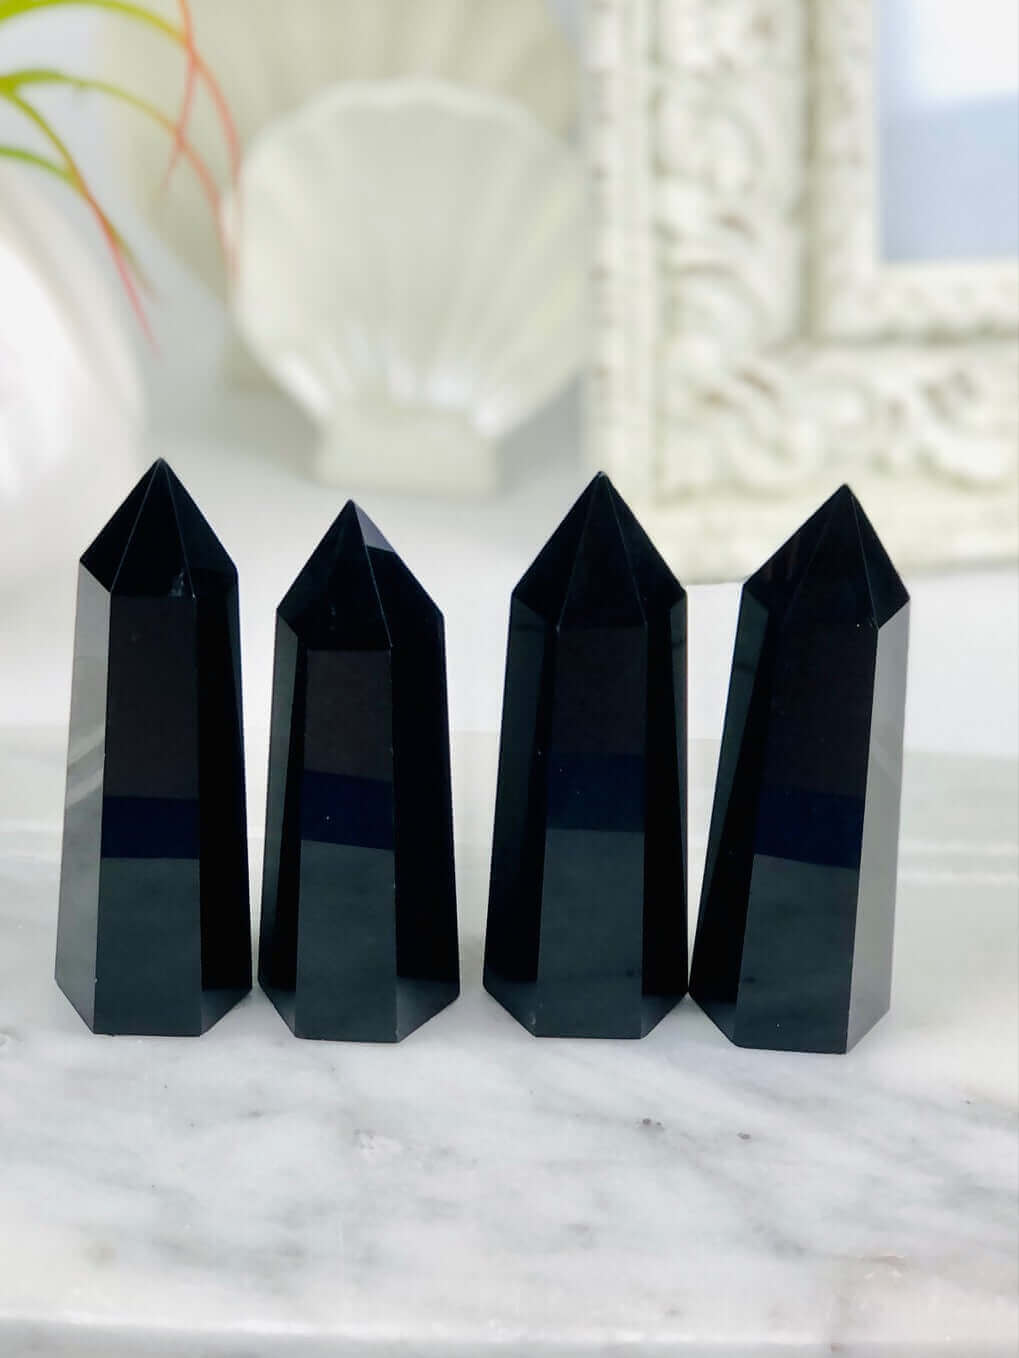 Obsidian Towers Crystal Aesthetic Photo